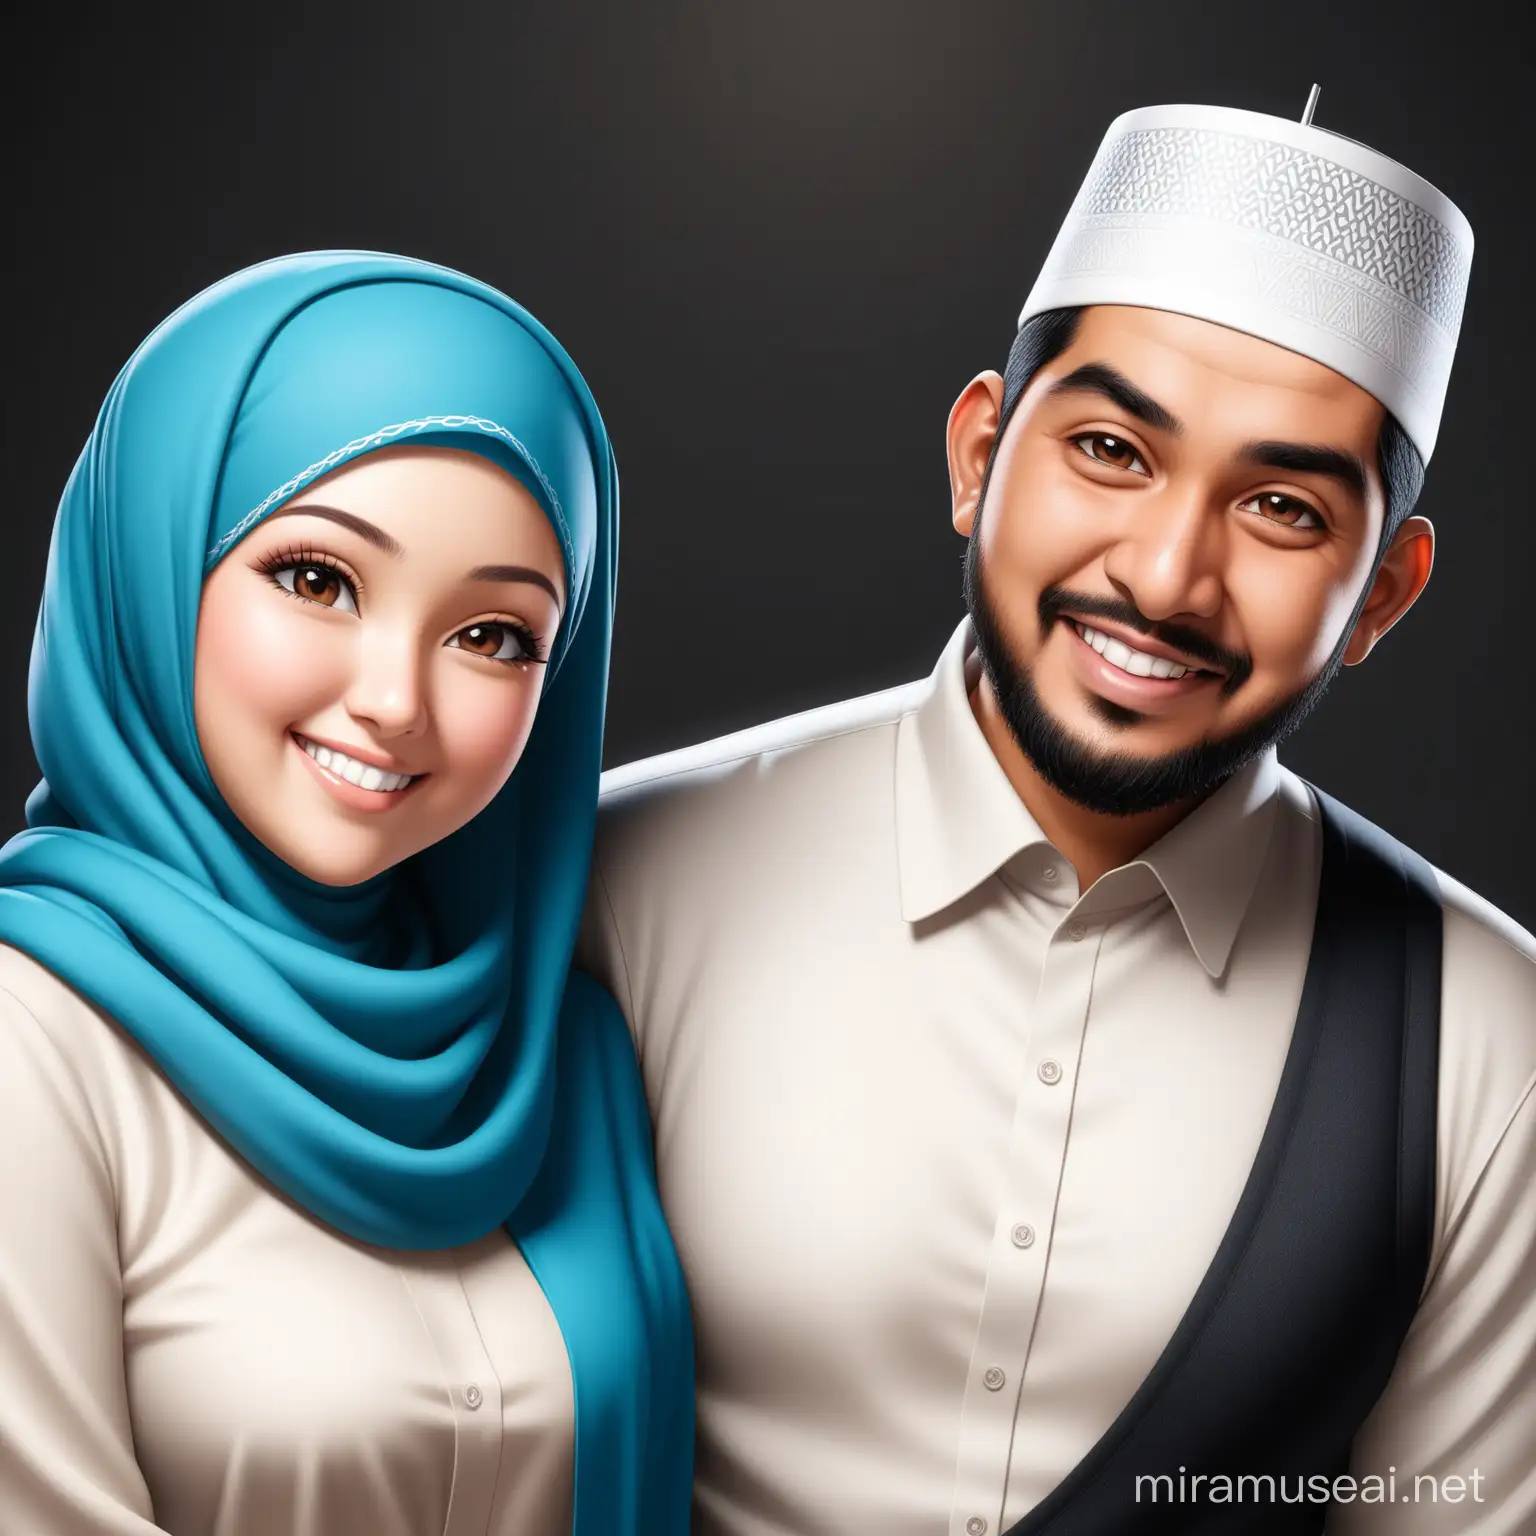 Realistic Muslim Couple Smiling Together in Black Photography Portrait